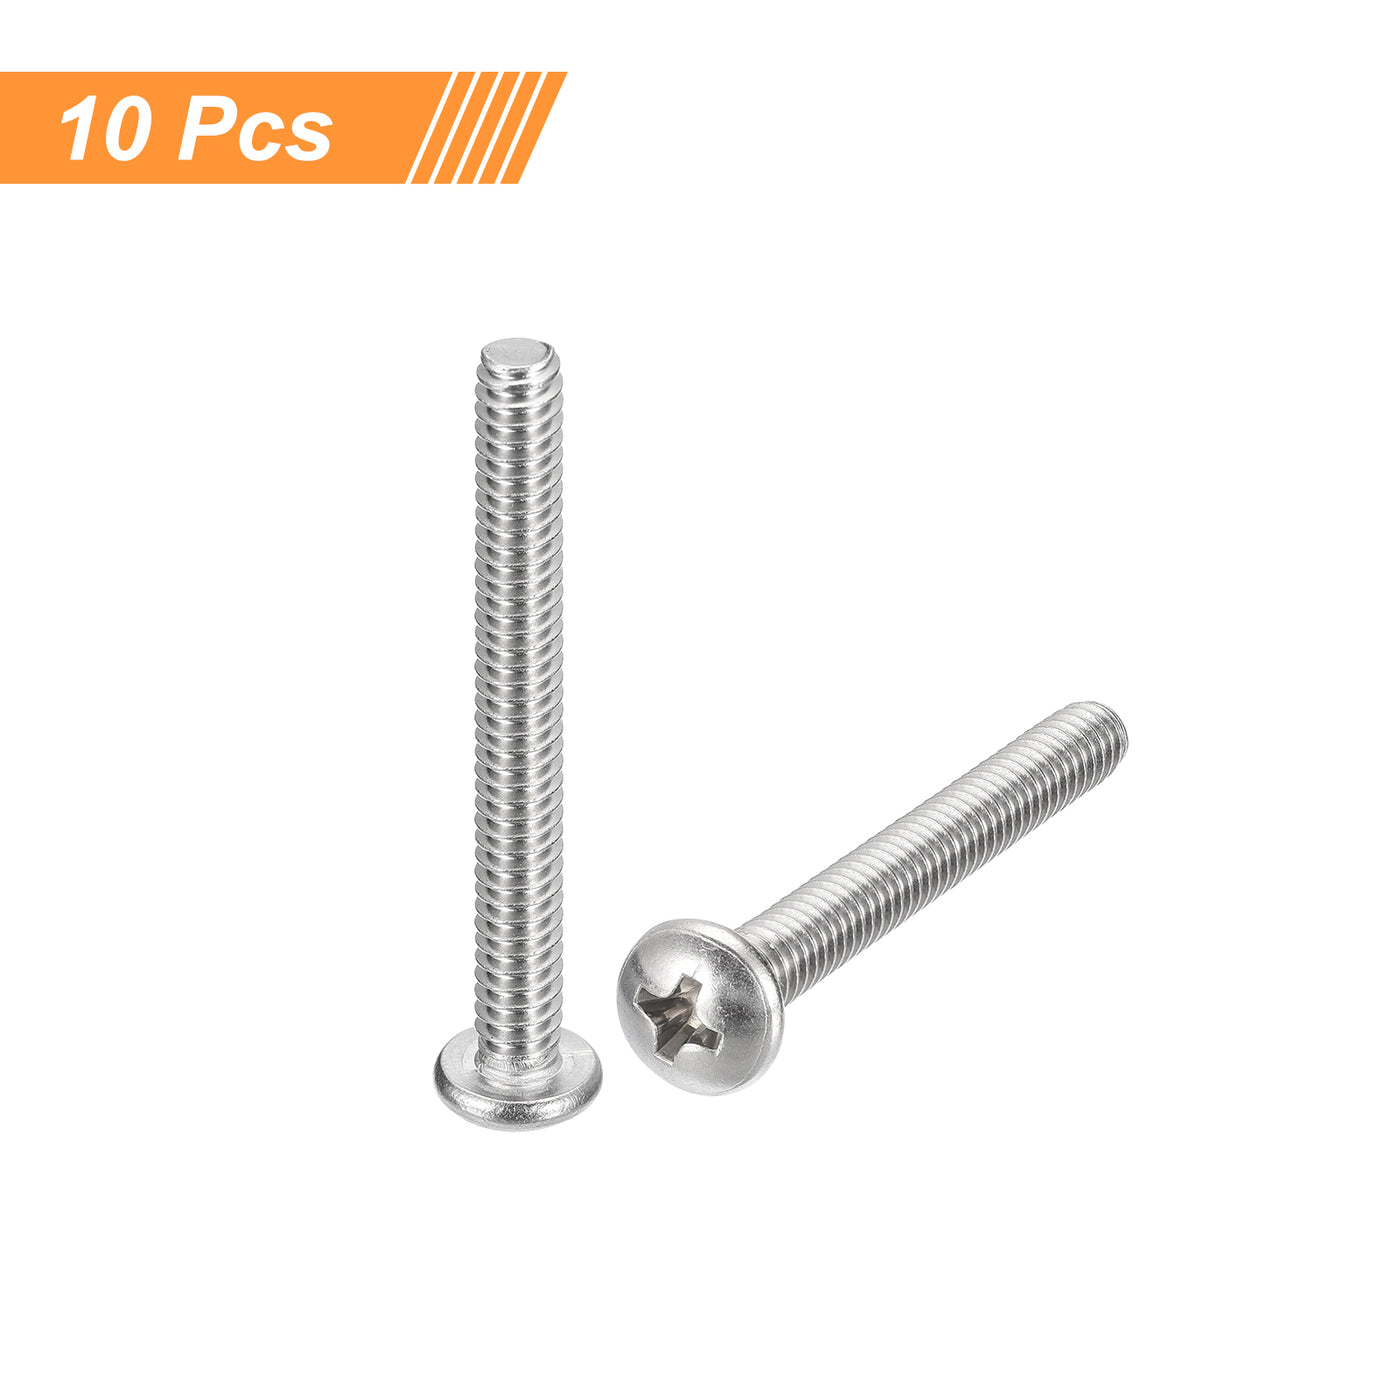 uxcell Uxcell #10-24x1-3/4" Pan Head Machine Screws, Stainless Steel 18-8 Screw, Pack of 10